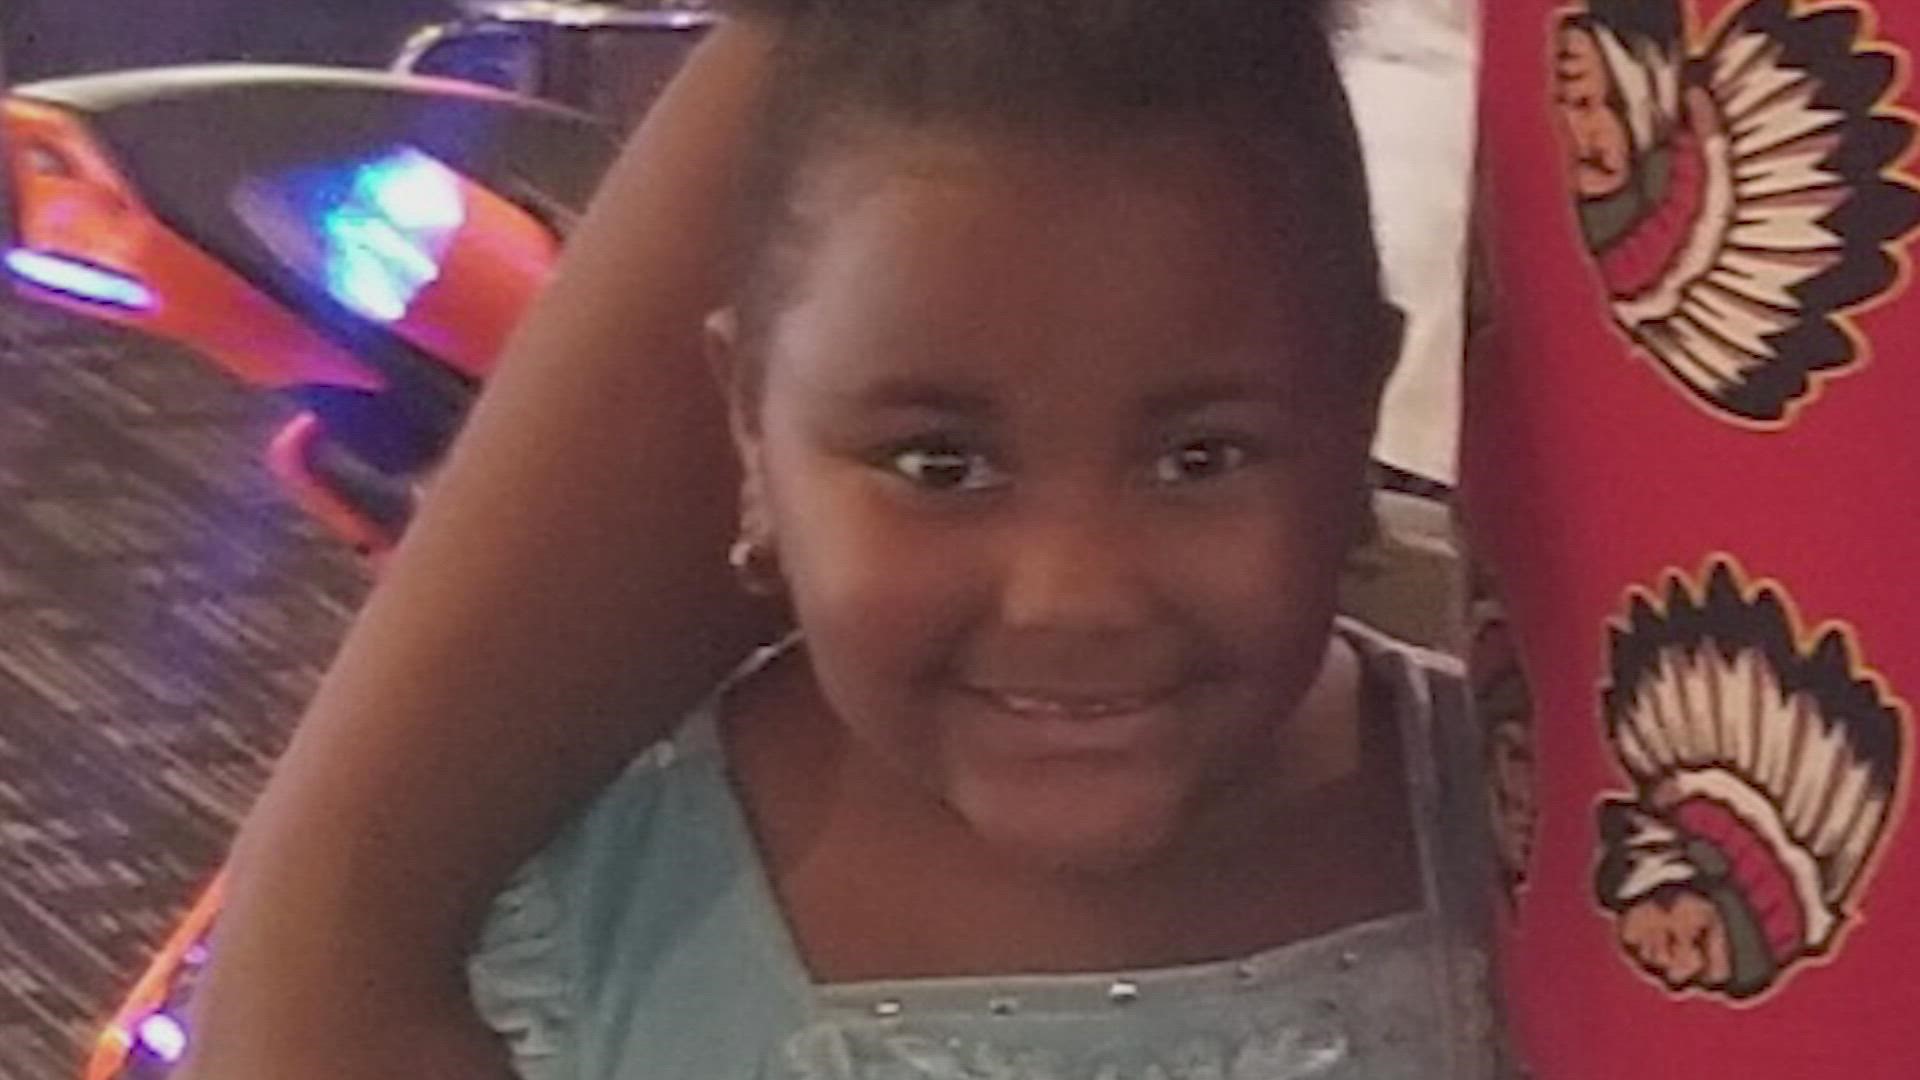 Family member said the 9-year-old is in an induced coma following an alleged road rage shooting. They believe someone remembers the suspect's vehicle that night.